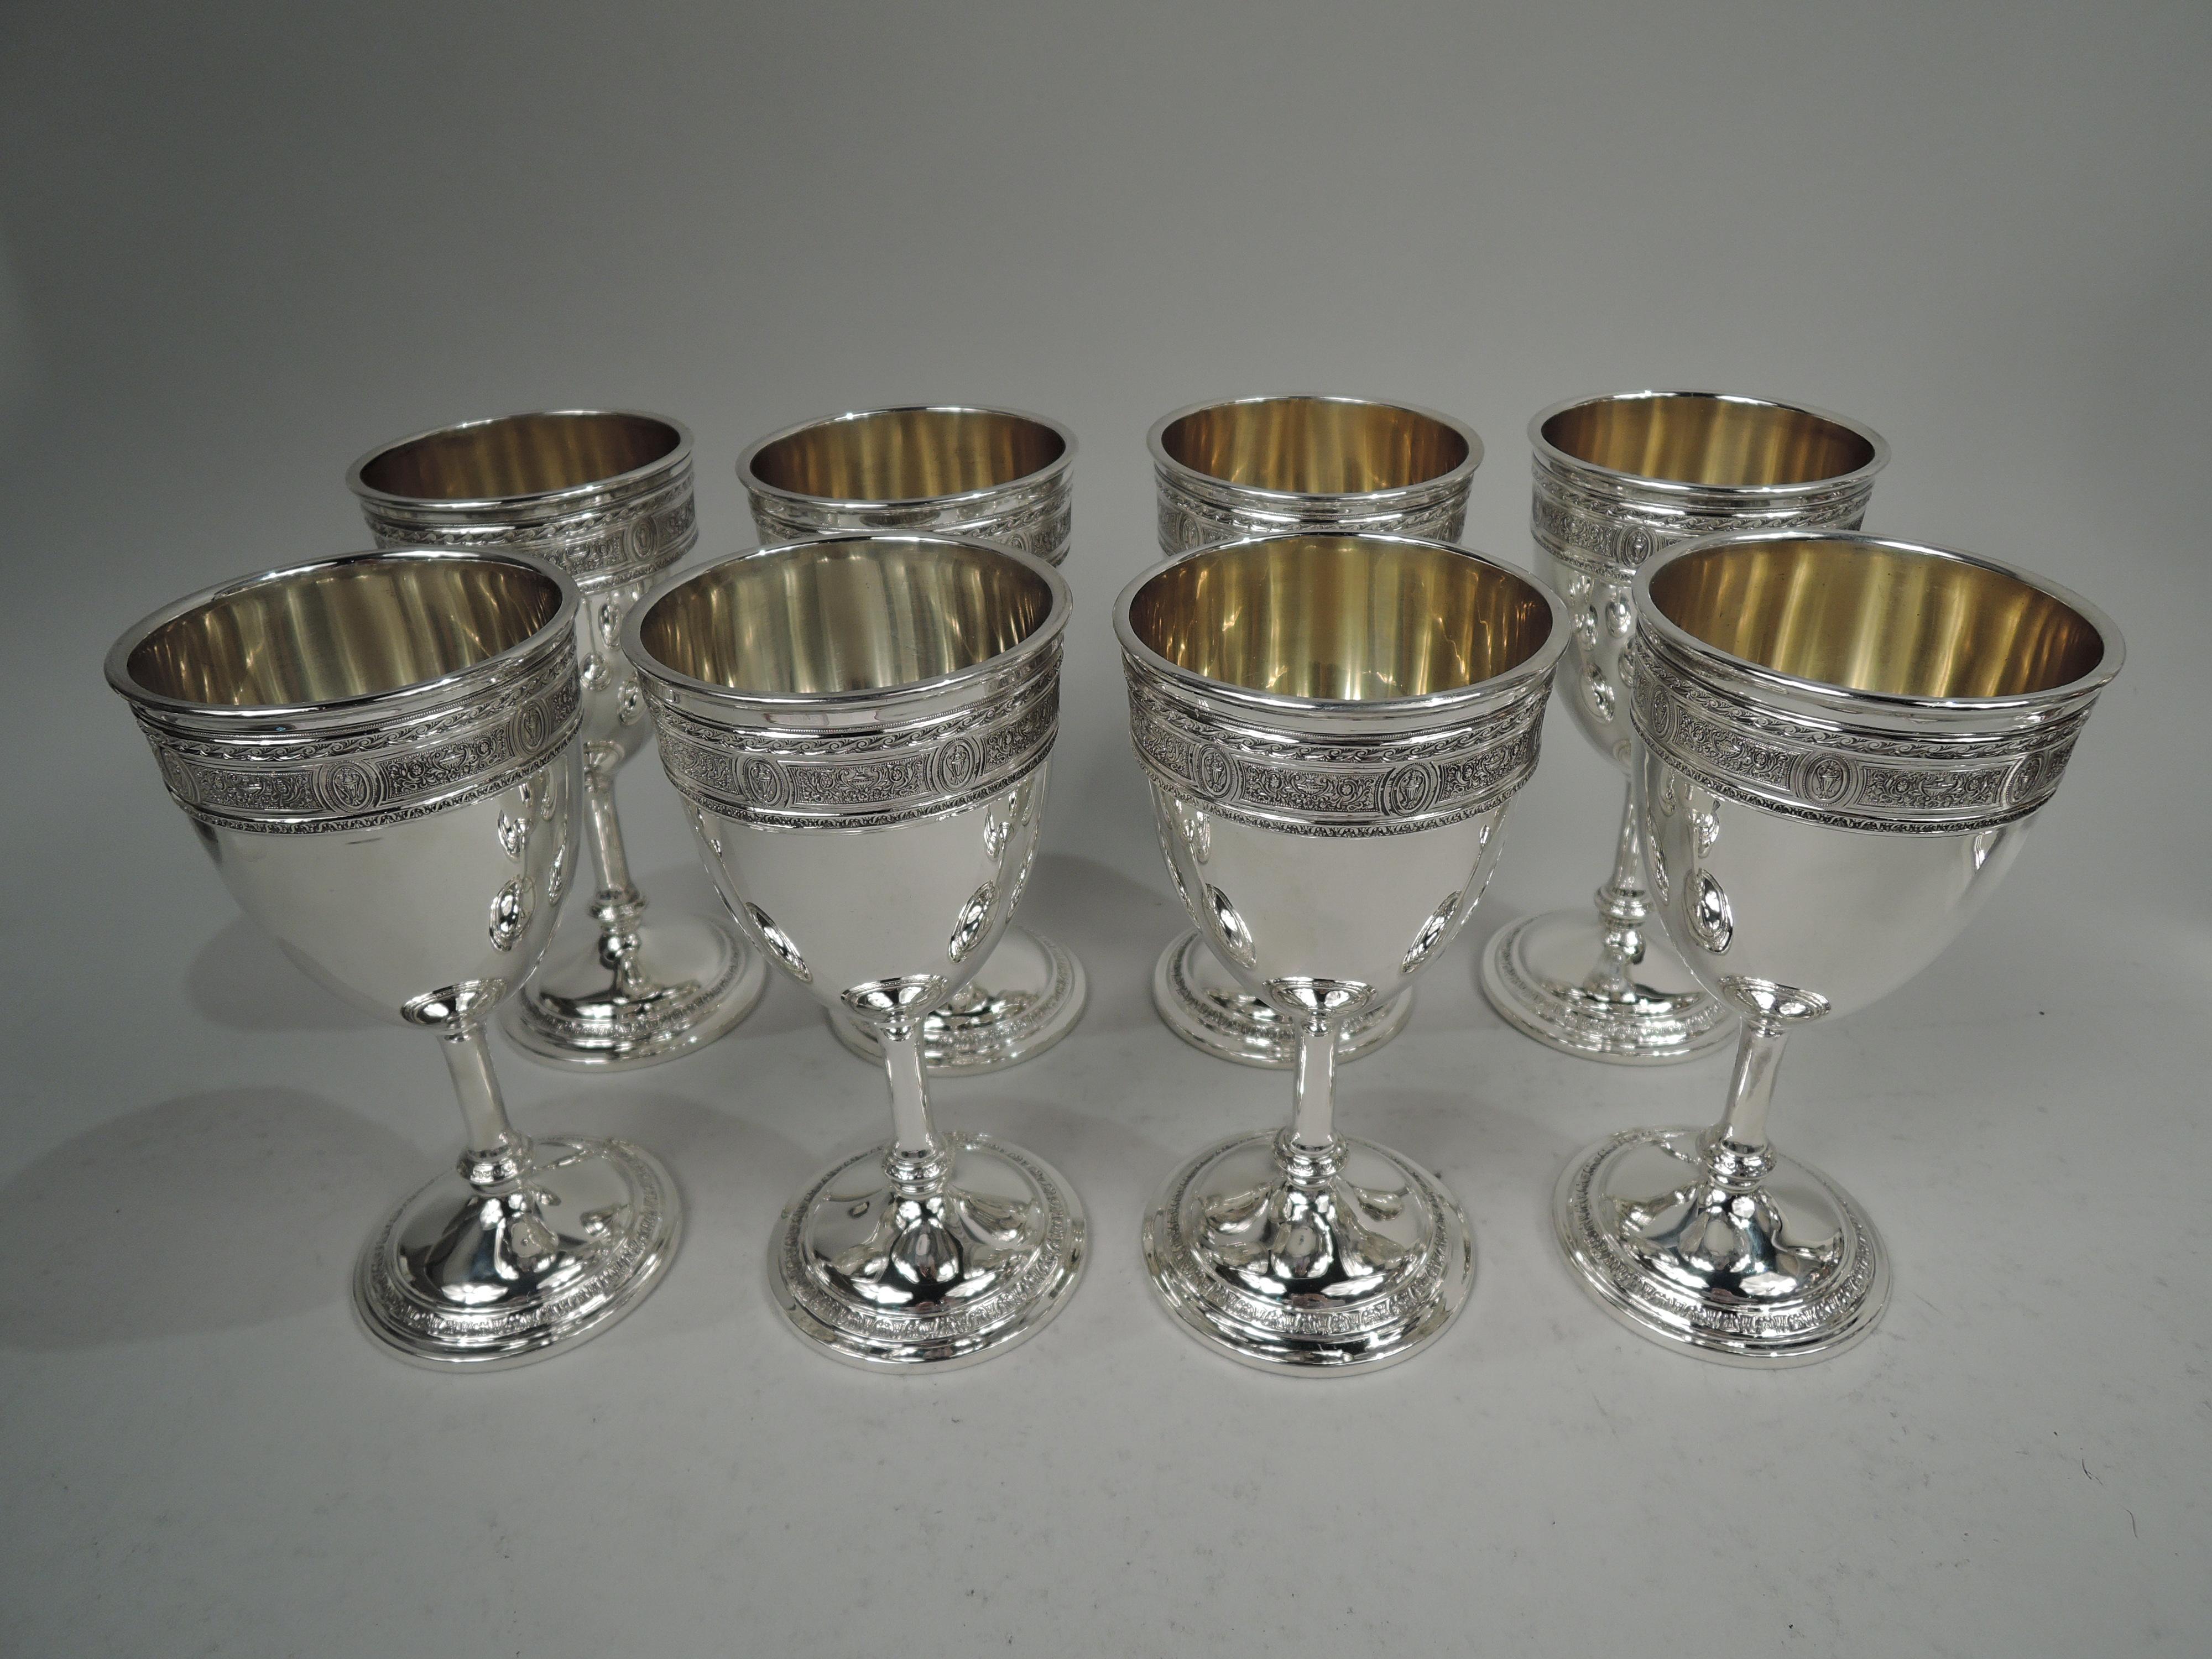 Set of 8 Wedgwood sterling silver goblets. Made by International Silver Co. in Meriden, Conn., ca 1920. Each: Ovoid bowl on cylindrical stem with base knop mounted to raised foot. At mouth rim raised band with Neoclassical ornament, including